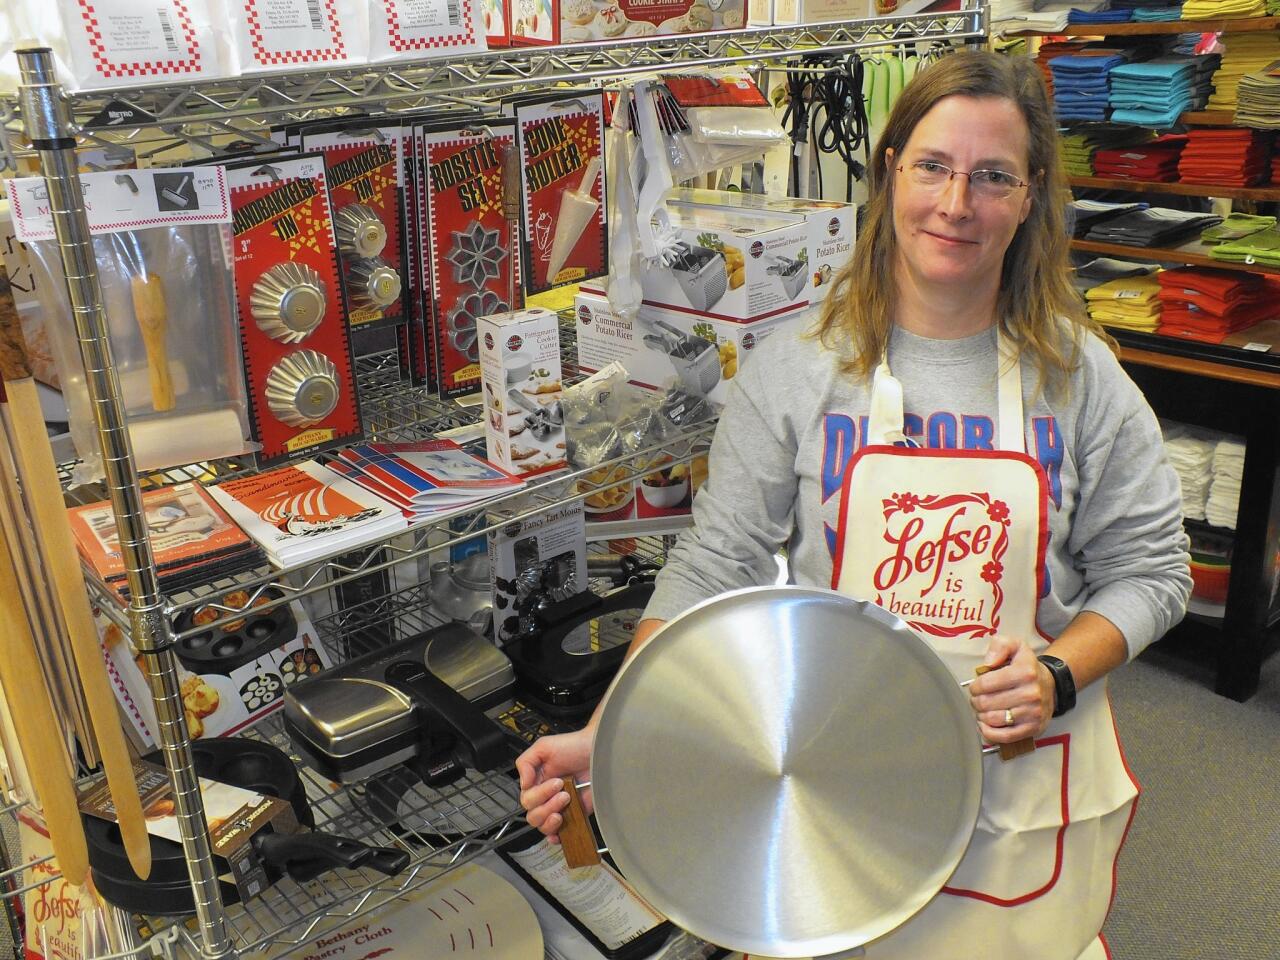 Wearing an apron that demonstrates her devotion to lefse, Julie Spilde holds one of the Norwegian-style pans sold in her Decorah kitchen store.